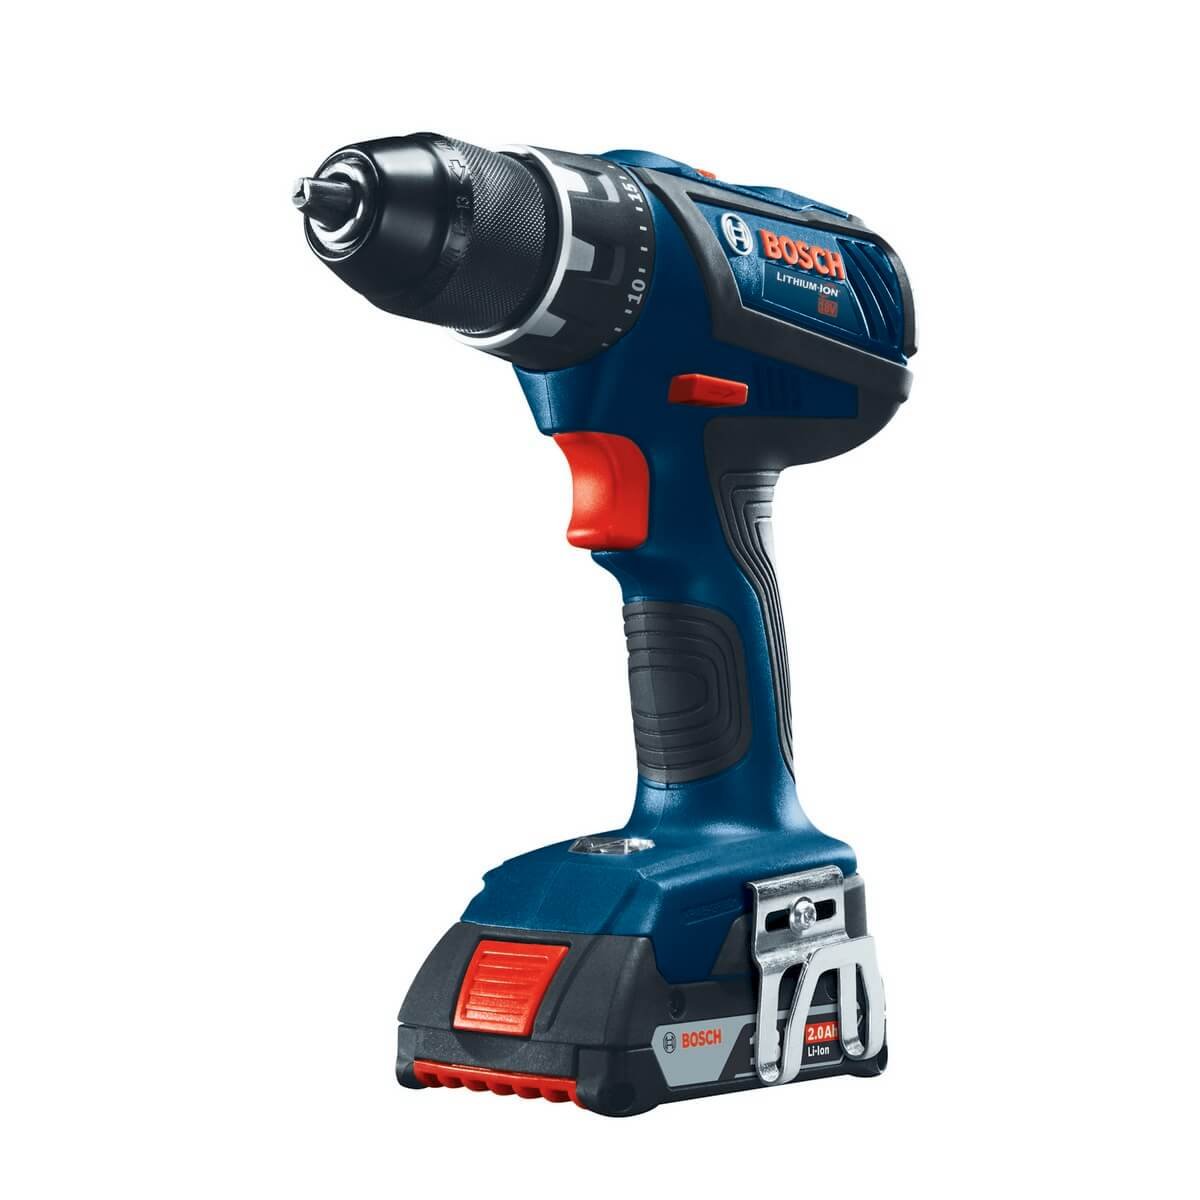 Bosch DDS181A-02 18V Compact Tough 1/2" Drill/Driver Kit with SlimPack Batteries